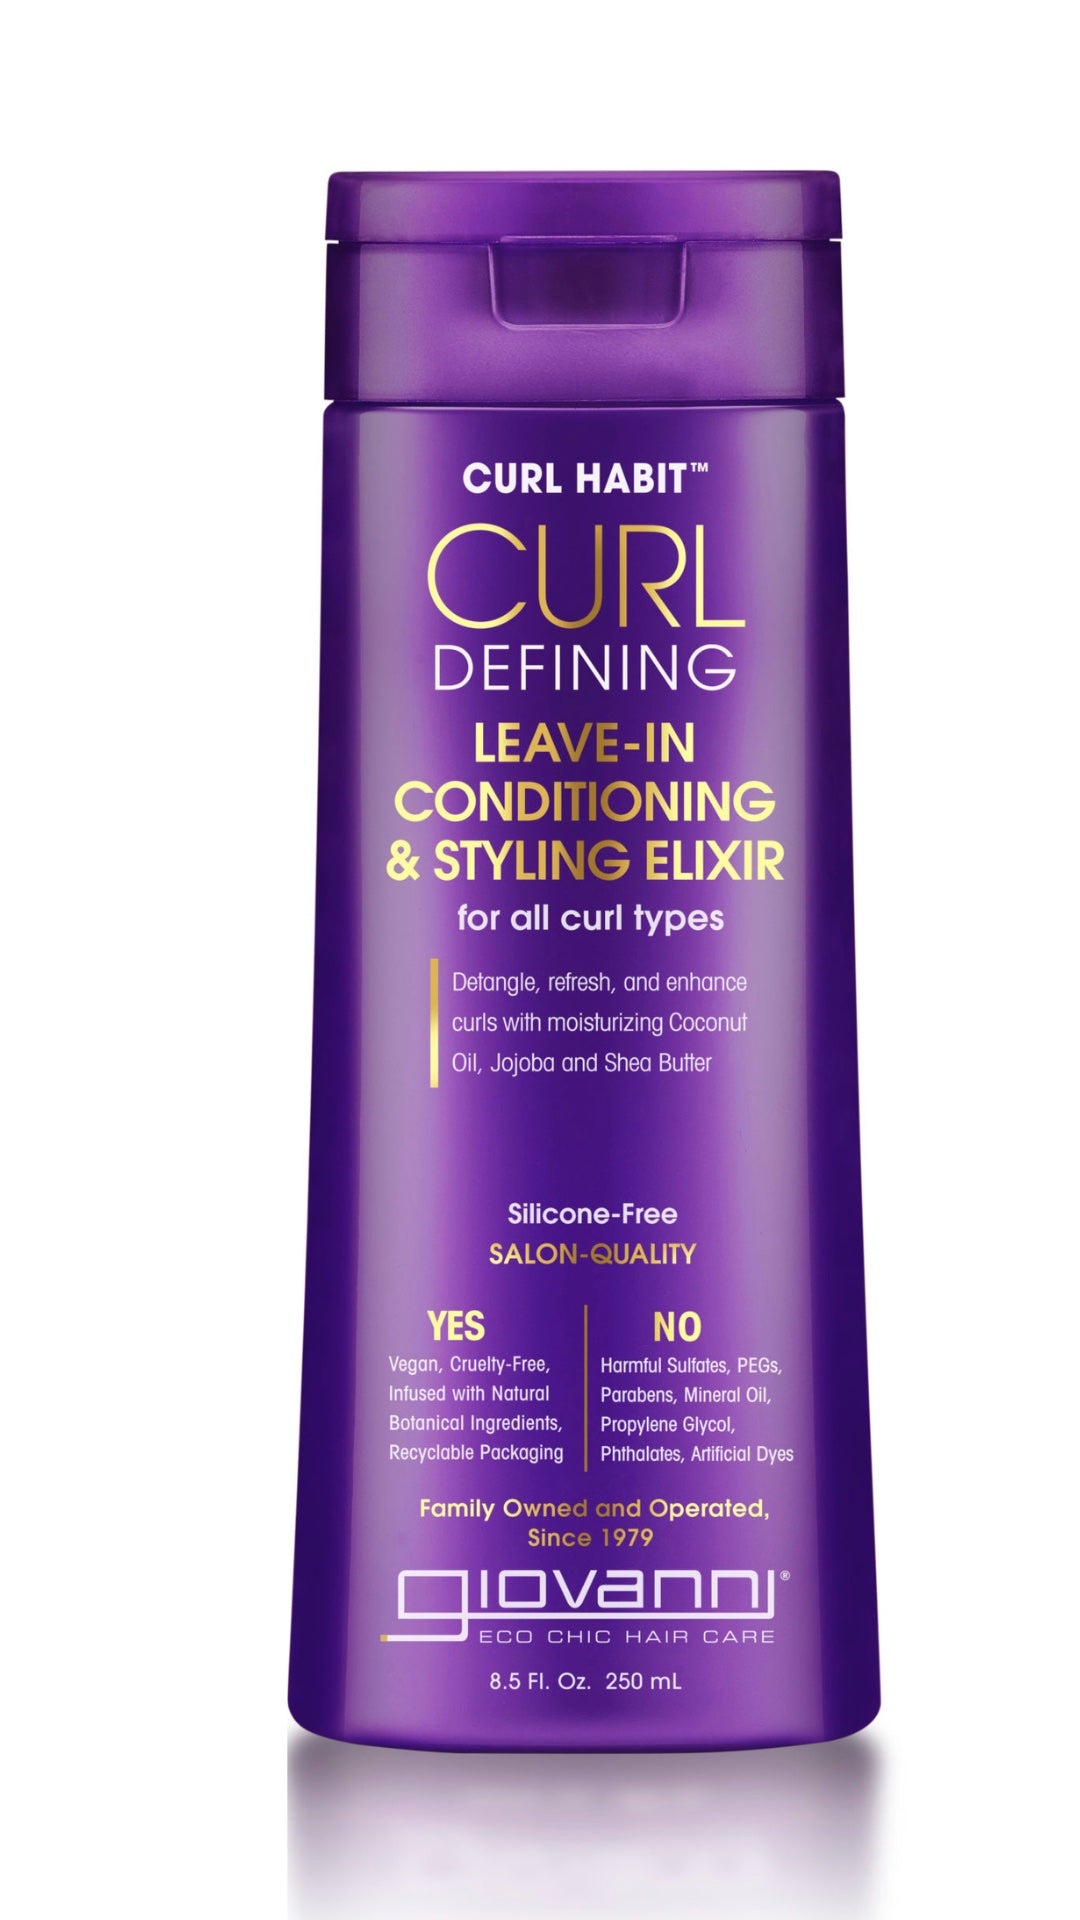 GIOVANNI - Curl Defining Leave-In Conditioning & Styling Elixir